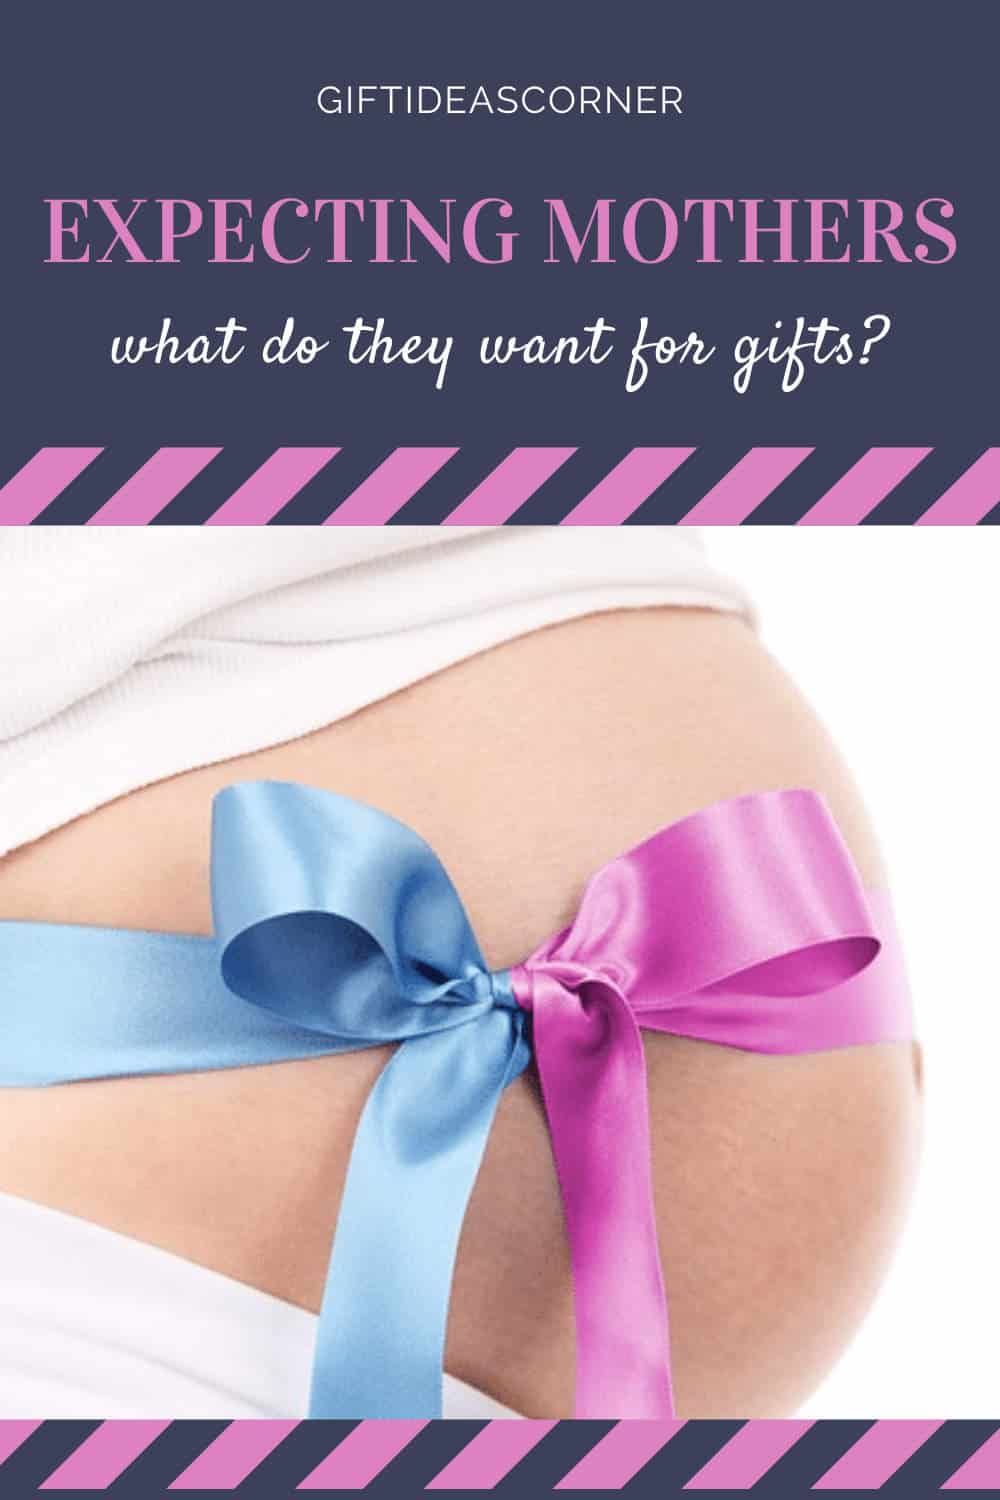 gifts for expecting mothers 2